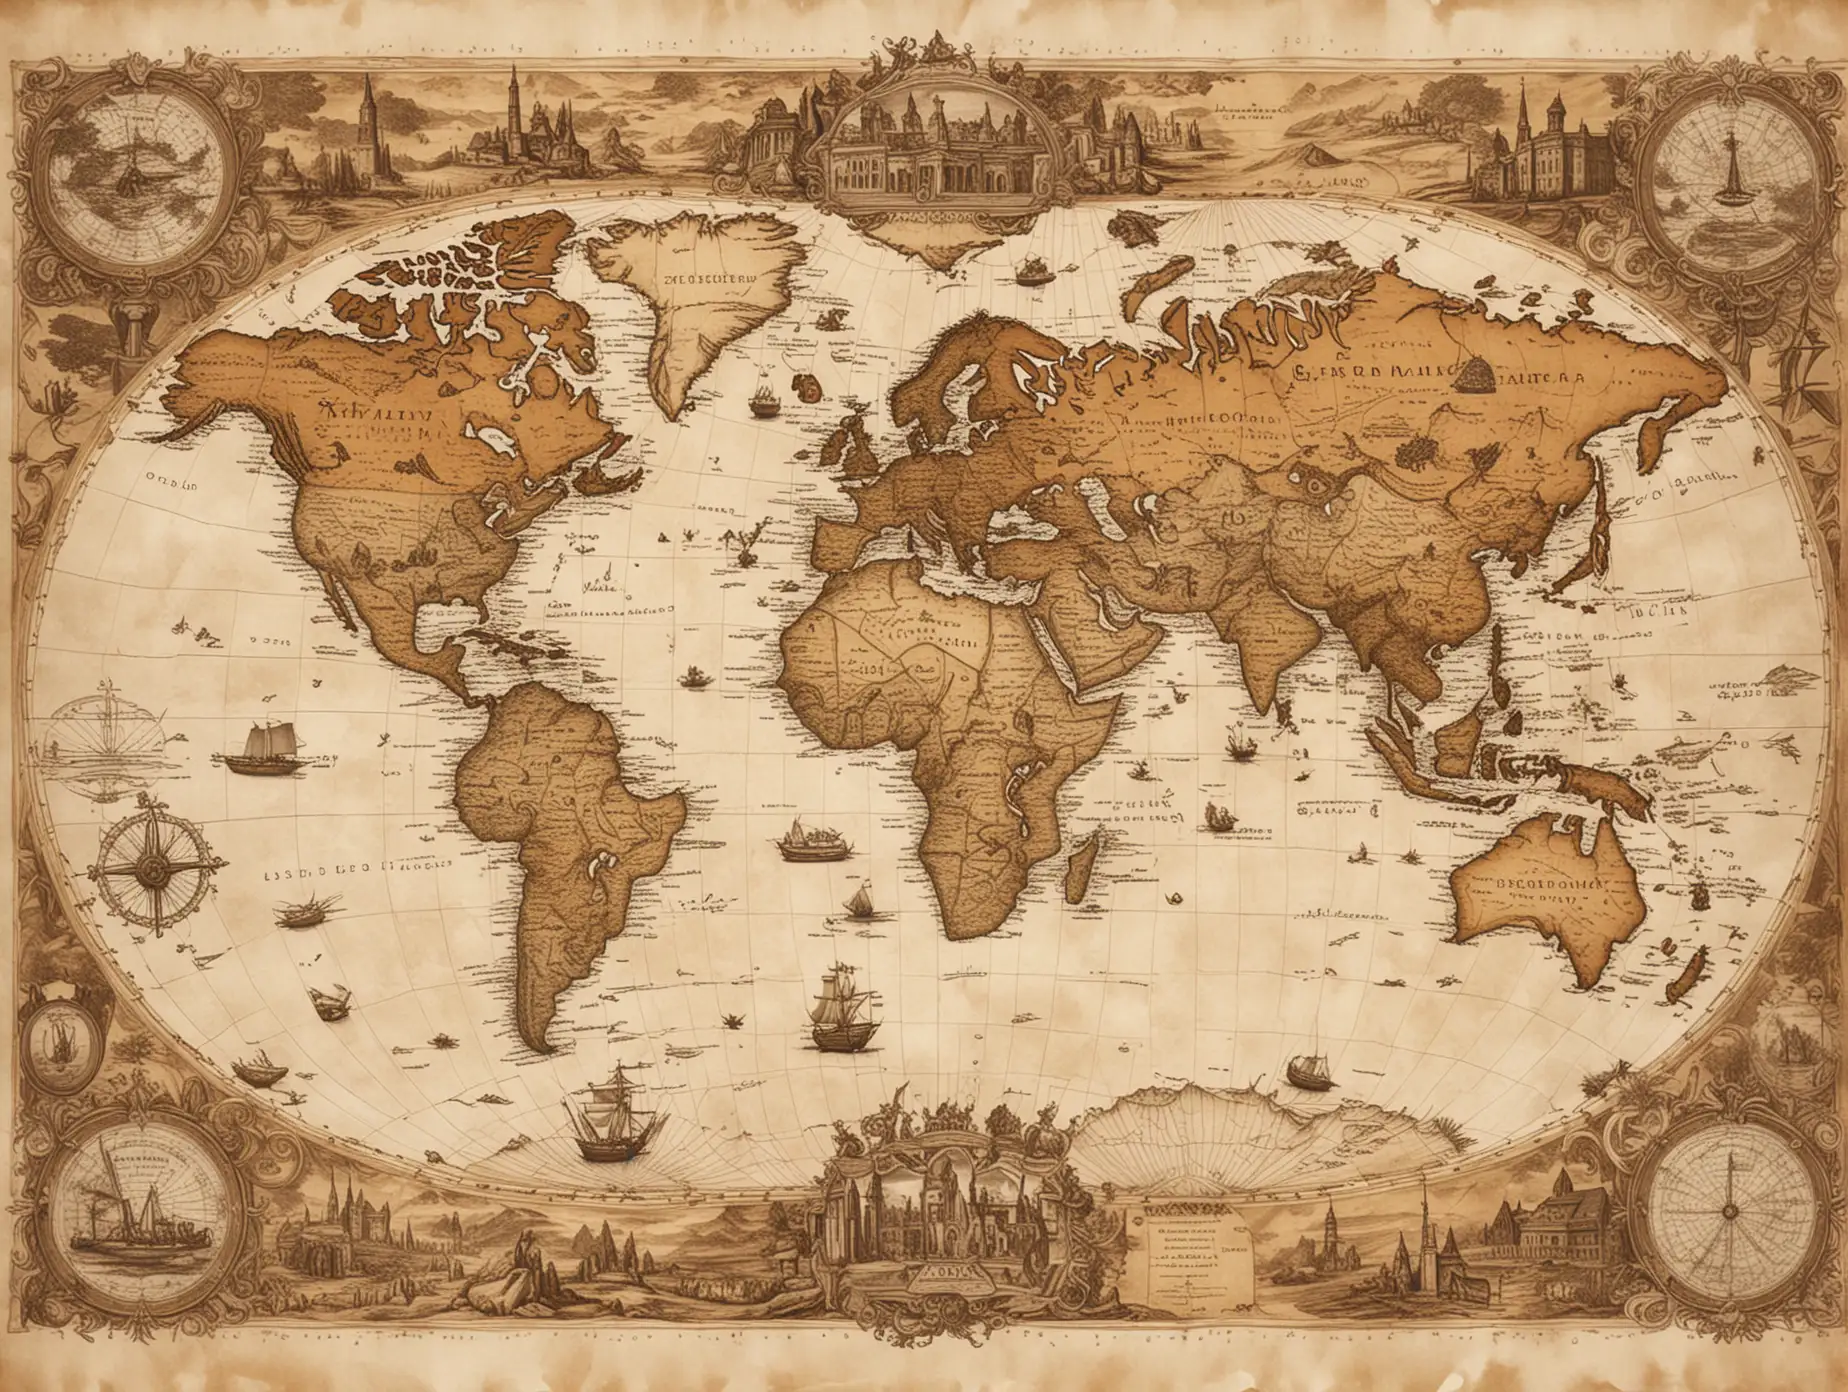 An exquisite conceptual art piece depicting a rustic, antique, and vintage world map. The map is sprawled across a massive parchment paper, featuring intricate details, with a warm, sepia-toned color palette. Continents are delicately hand-drawn, with swirling lines representing oceans and a touch of gold to highlight significant landmarks. The overall ambiance of the image evokes a sense of historical exploration and adventure., conceptual art, the dimensions are 2700 x 1120 pixels